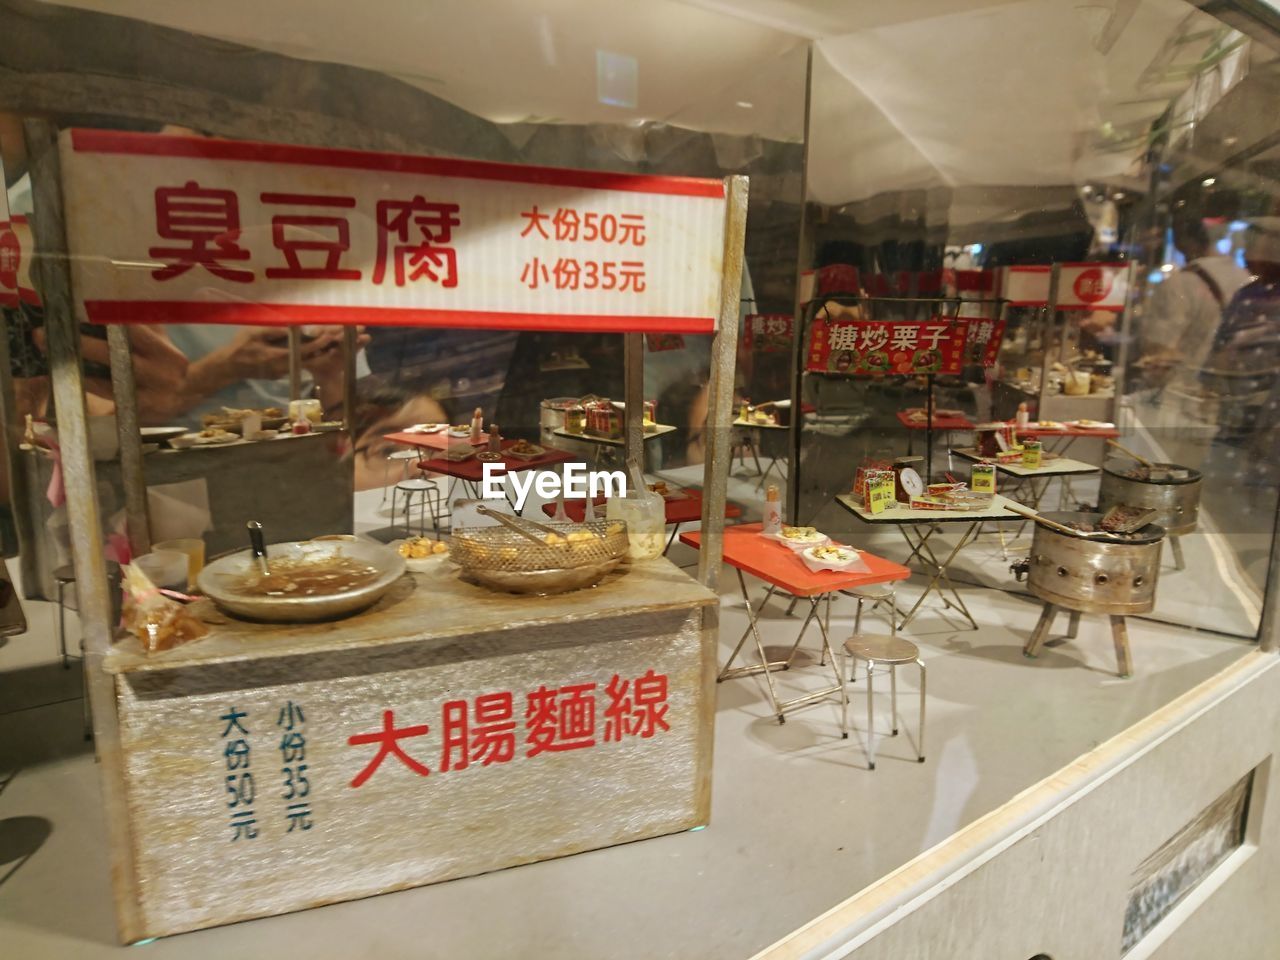 INFORMATION SIGN IN STORE